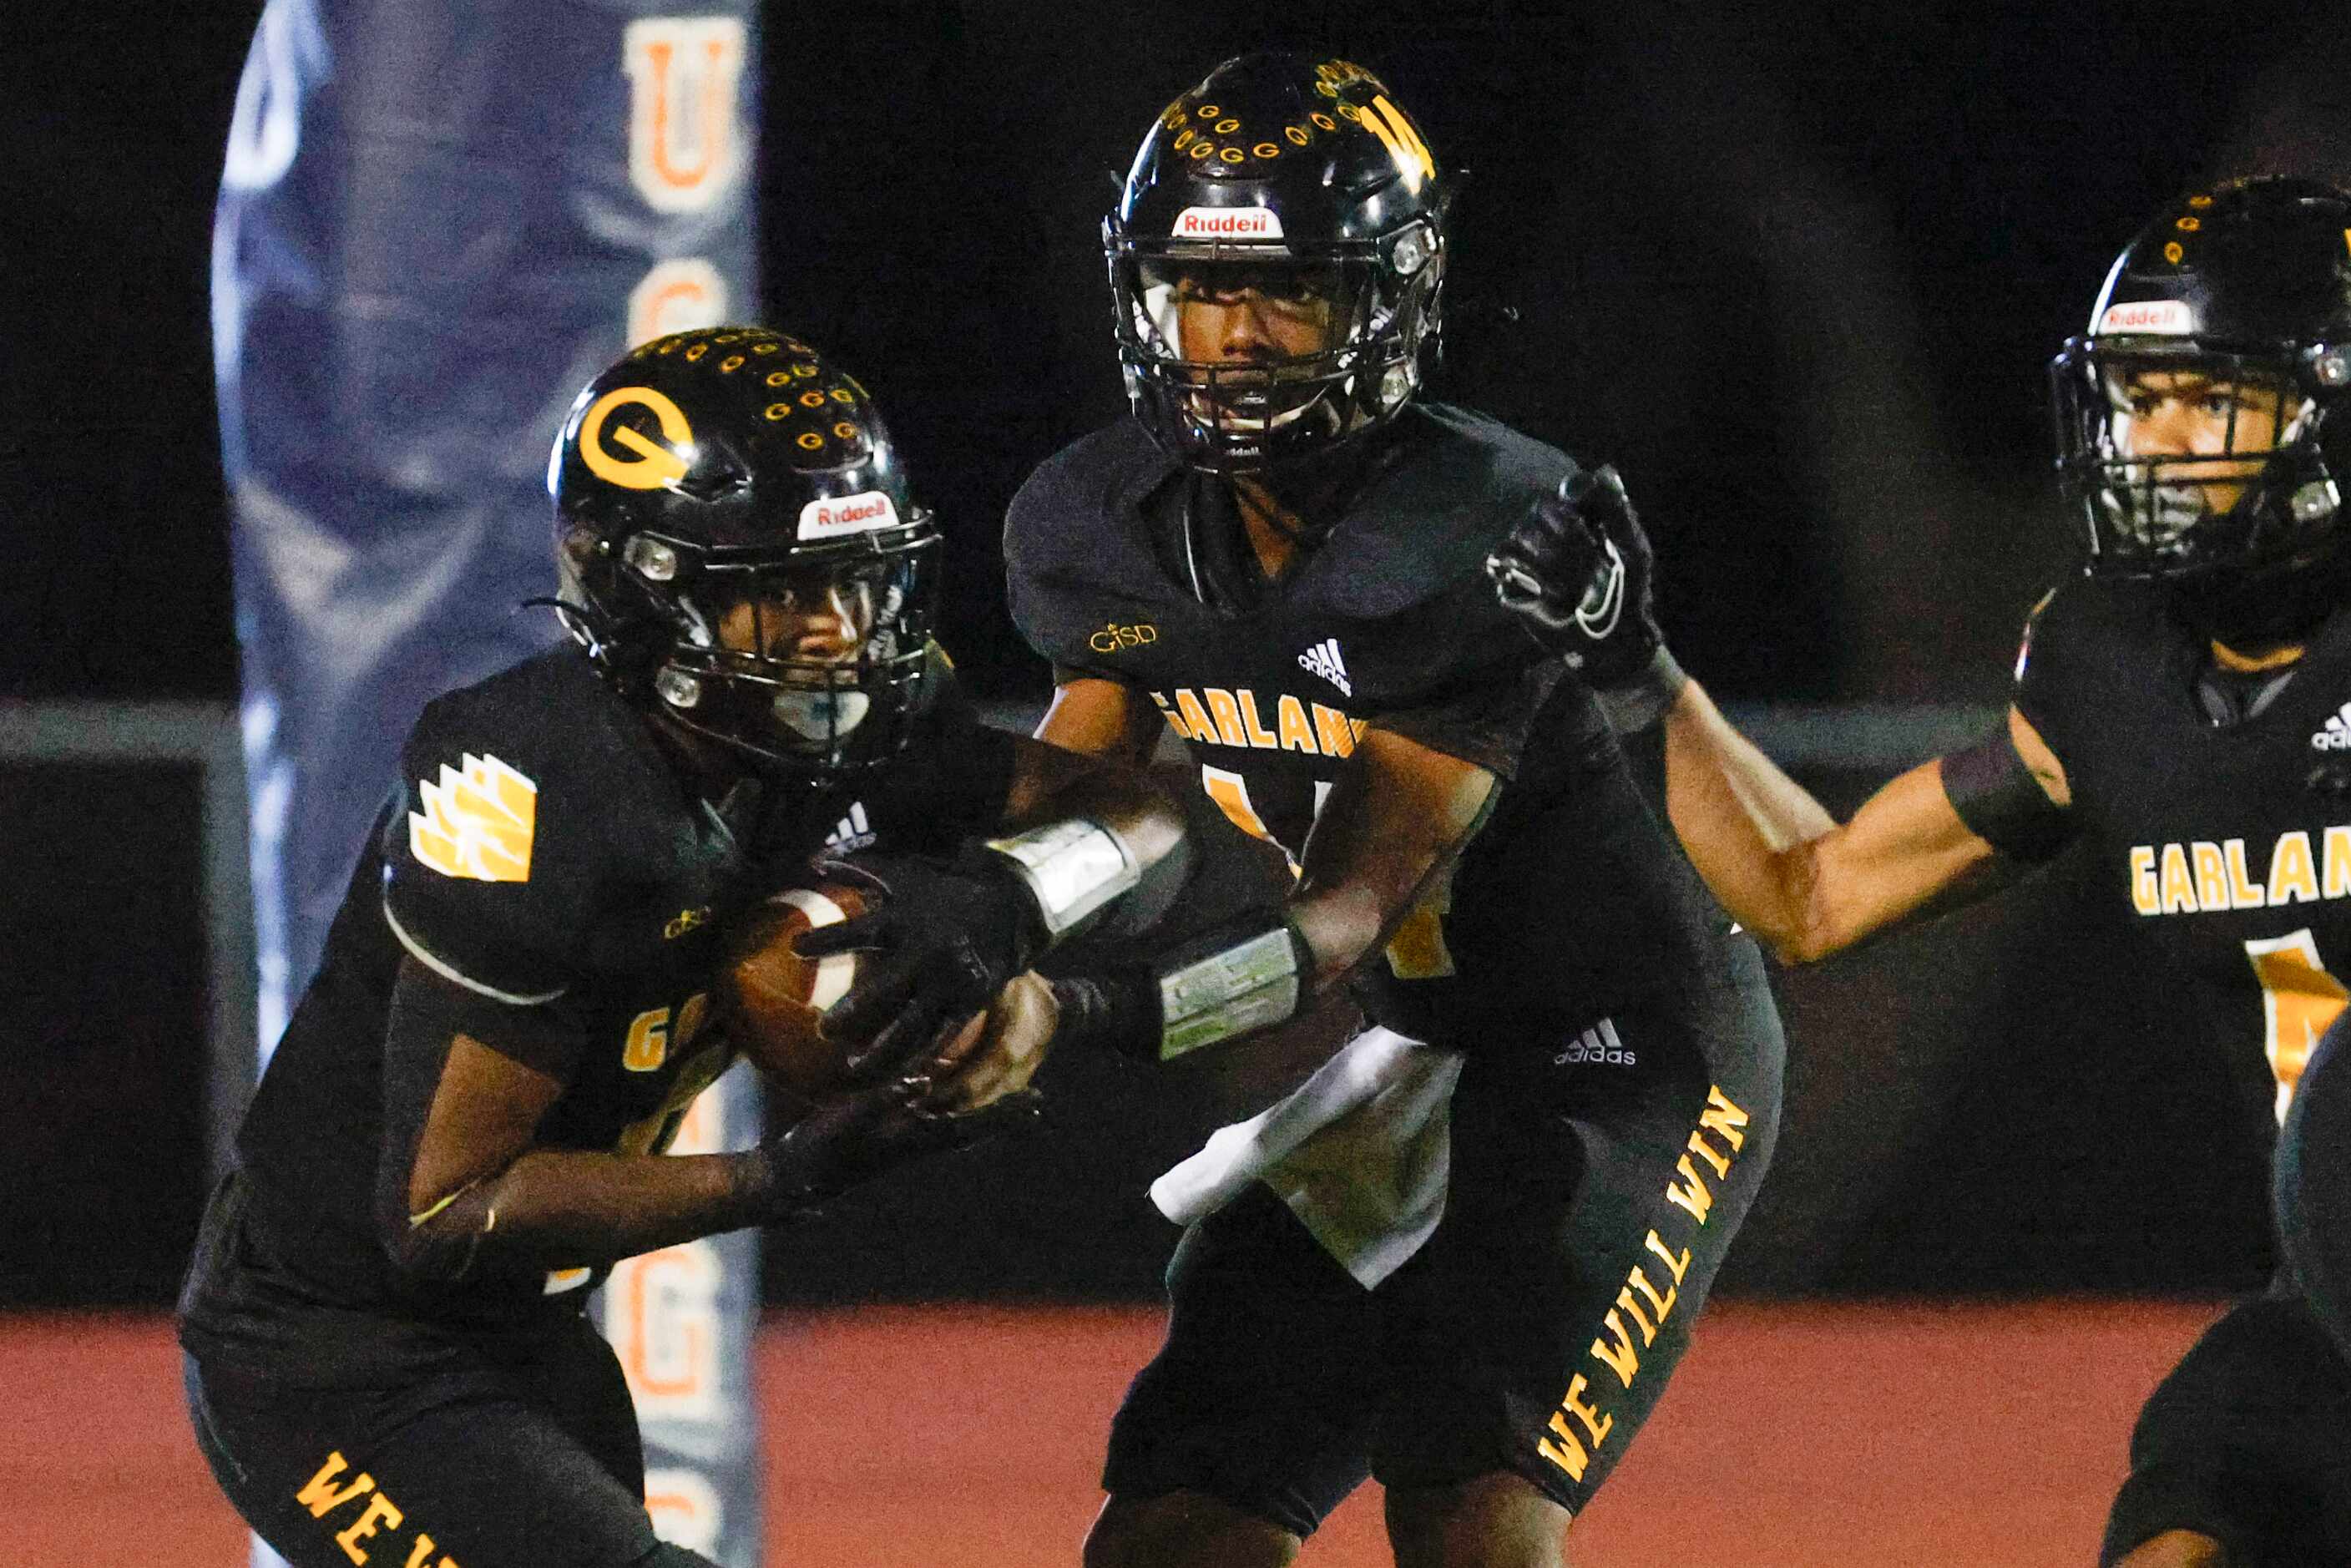 Garland High school’s De’Adrian Hardy (left) receives the ball from QB Orlando Routt during...